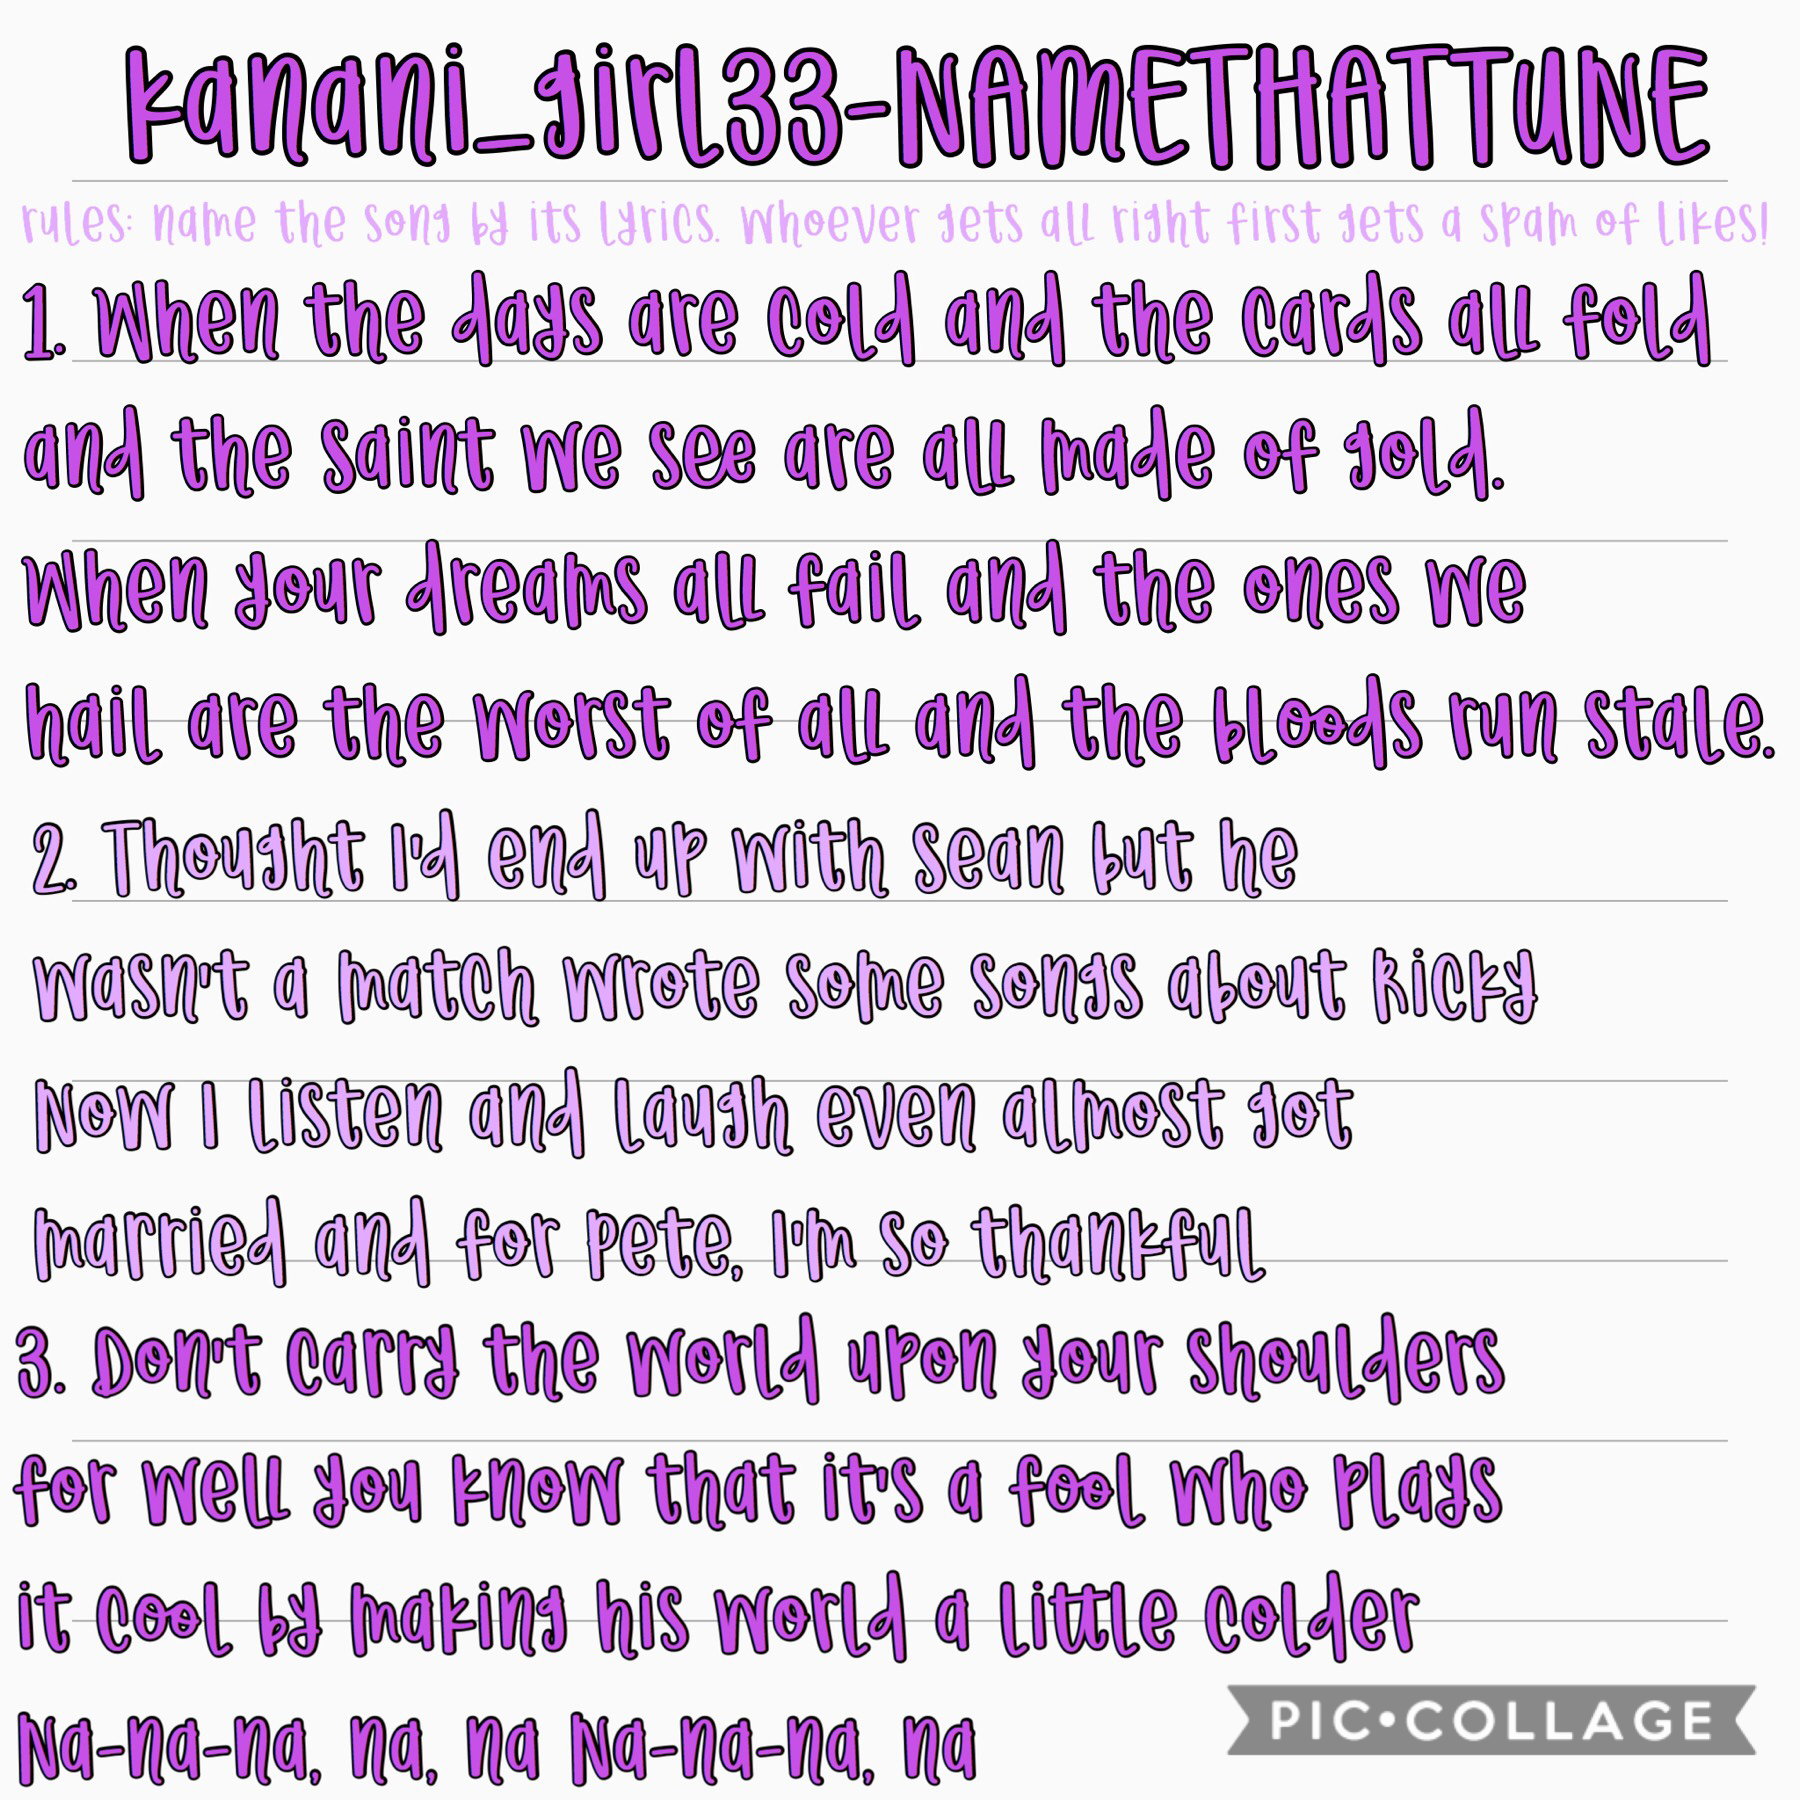 New “kanani_girl33-NAMETHATTUNE” whoever gets all right first gets a spam of likes! Have to guess both artist and name of song! July 31, 2019